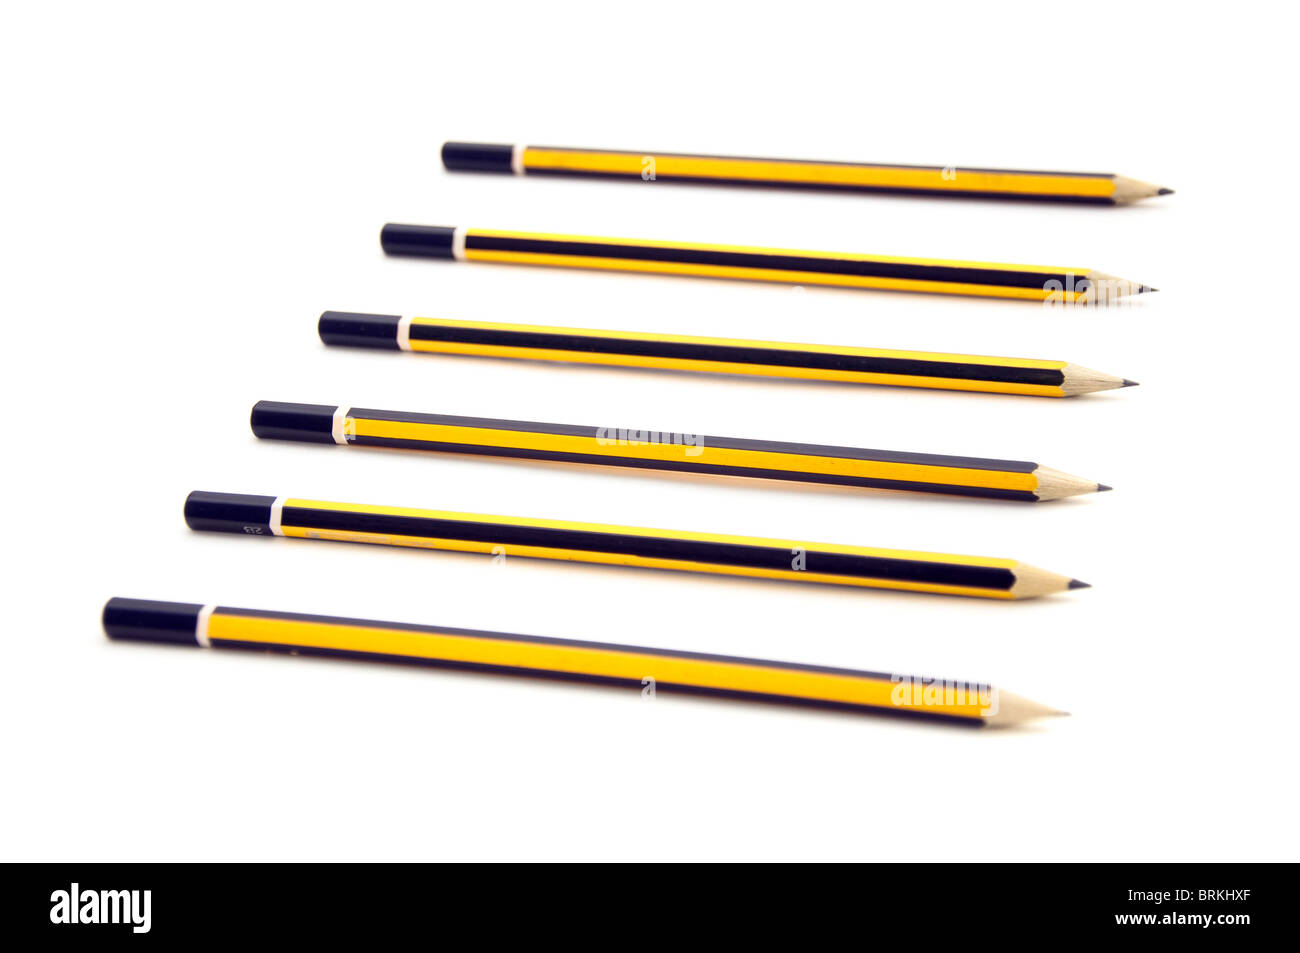 Wooden graphite black and yellow pencils over a white background Stock Photo